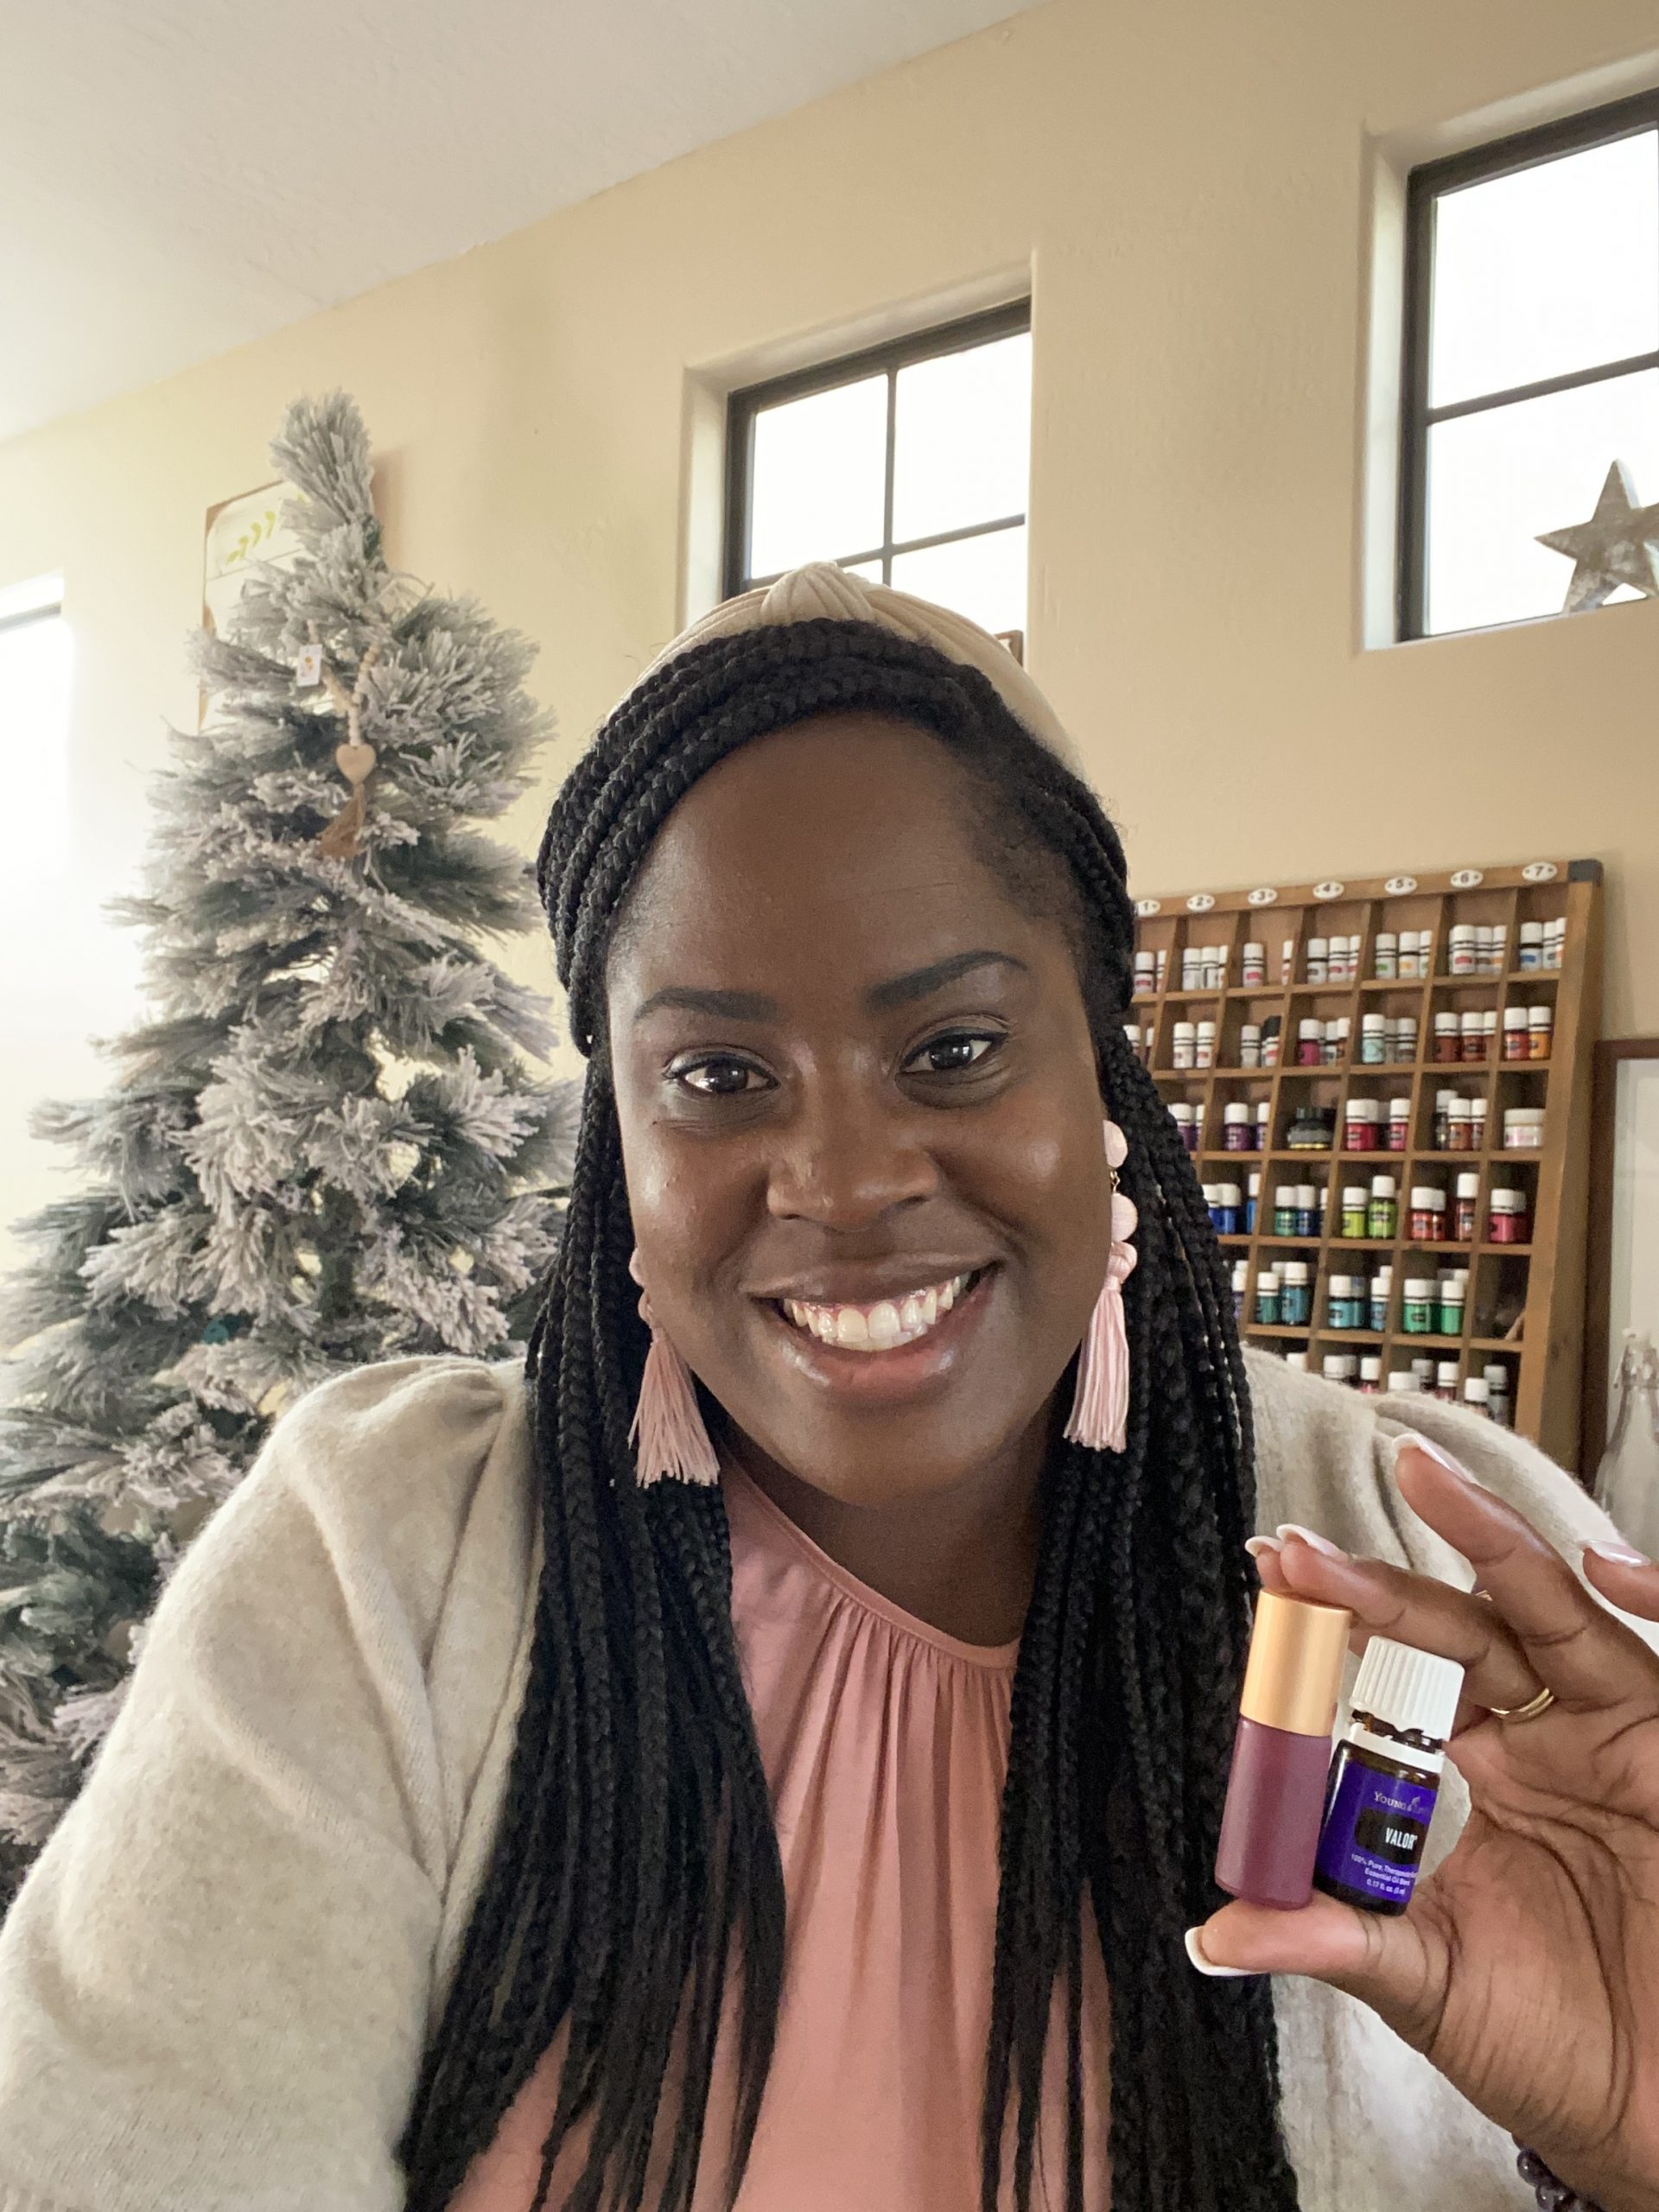 Chiazor Arah shares how she uses Young Living's popular blend, Valor, for emotional support by providing some beautiful essential oil recipes for us!